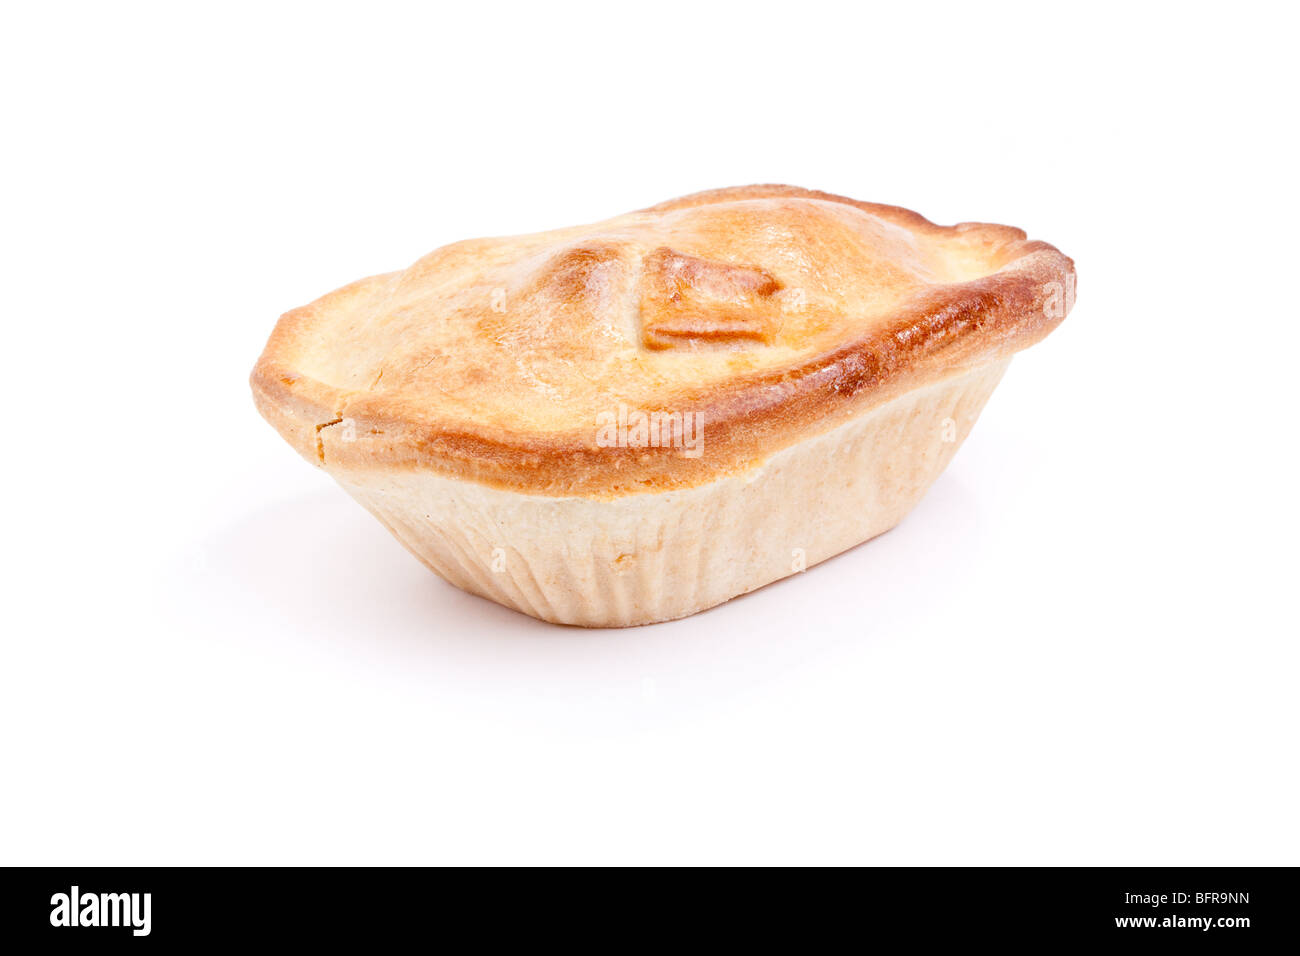 Individual short crust pastry steak pie isolated against white background Stock Photo